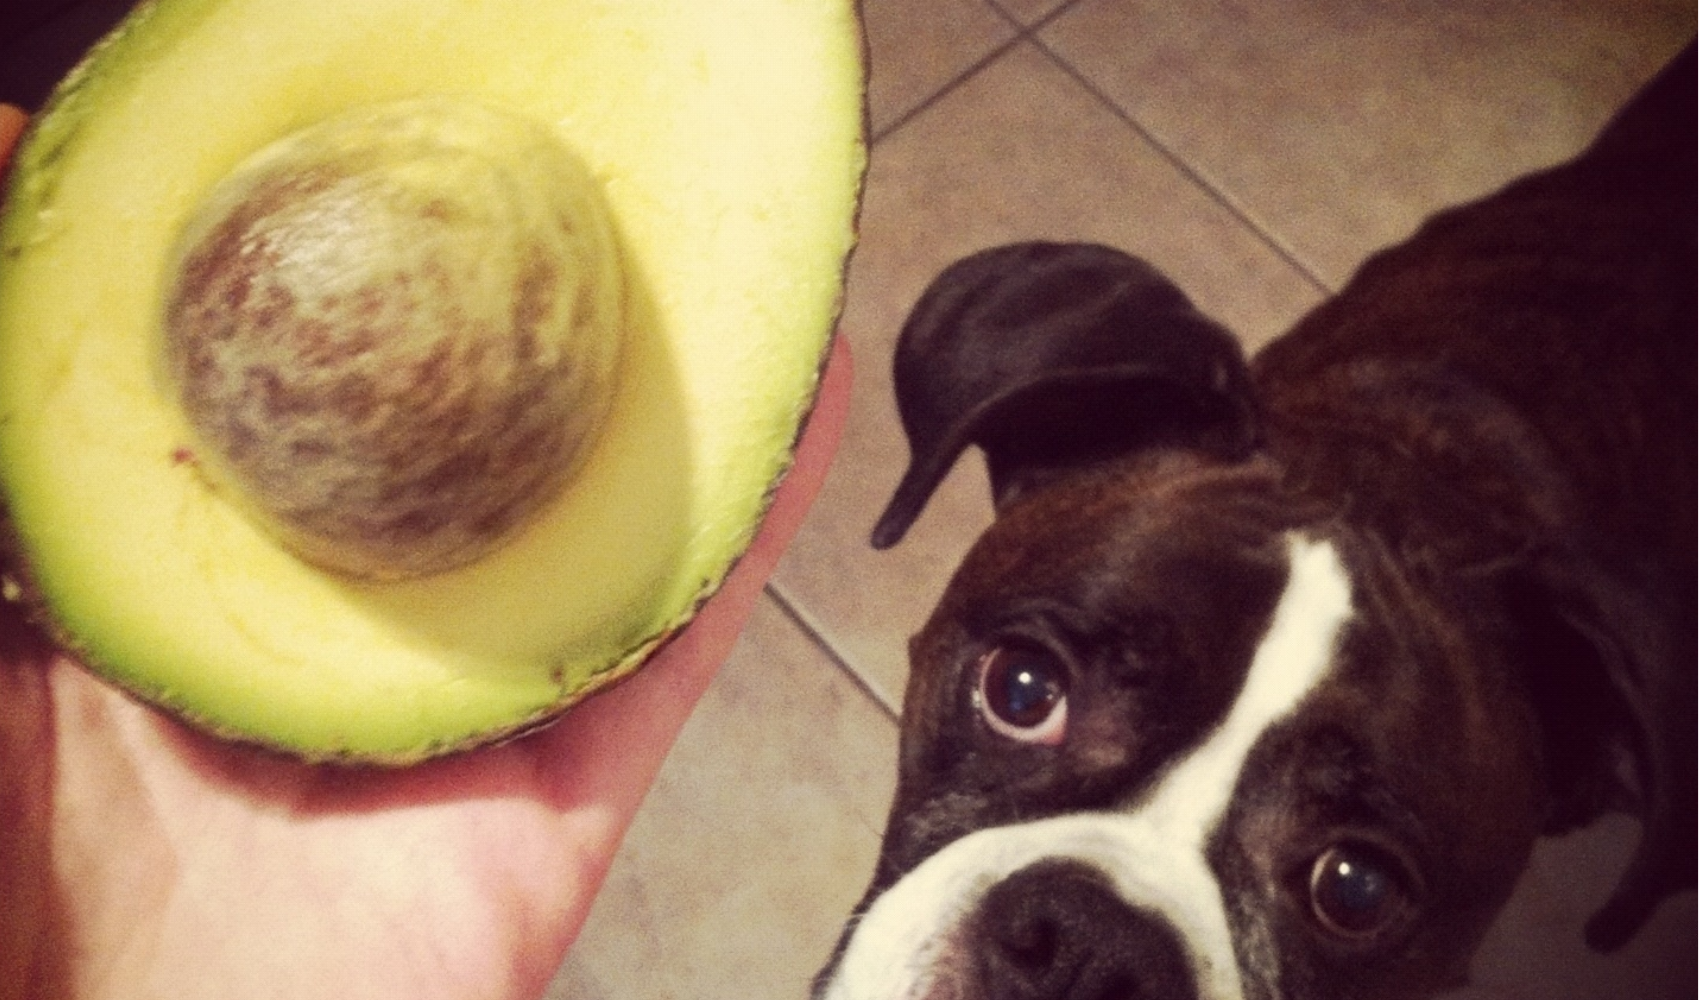 21 People Foods That Are Toxic For Your Dog